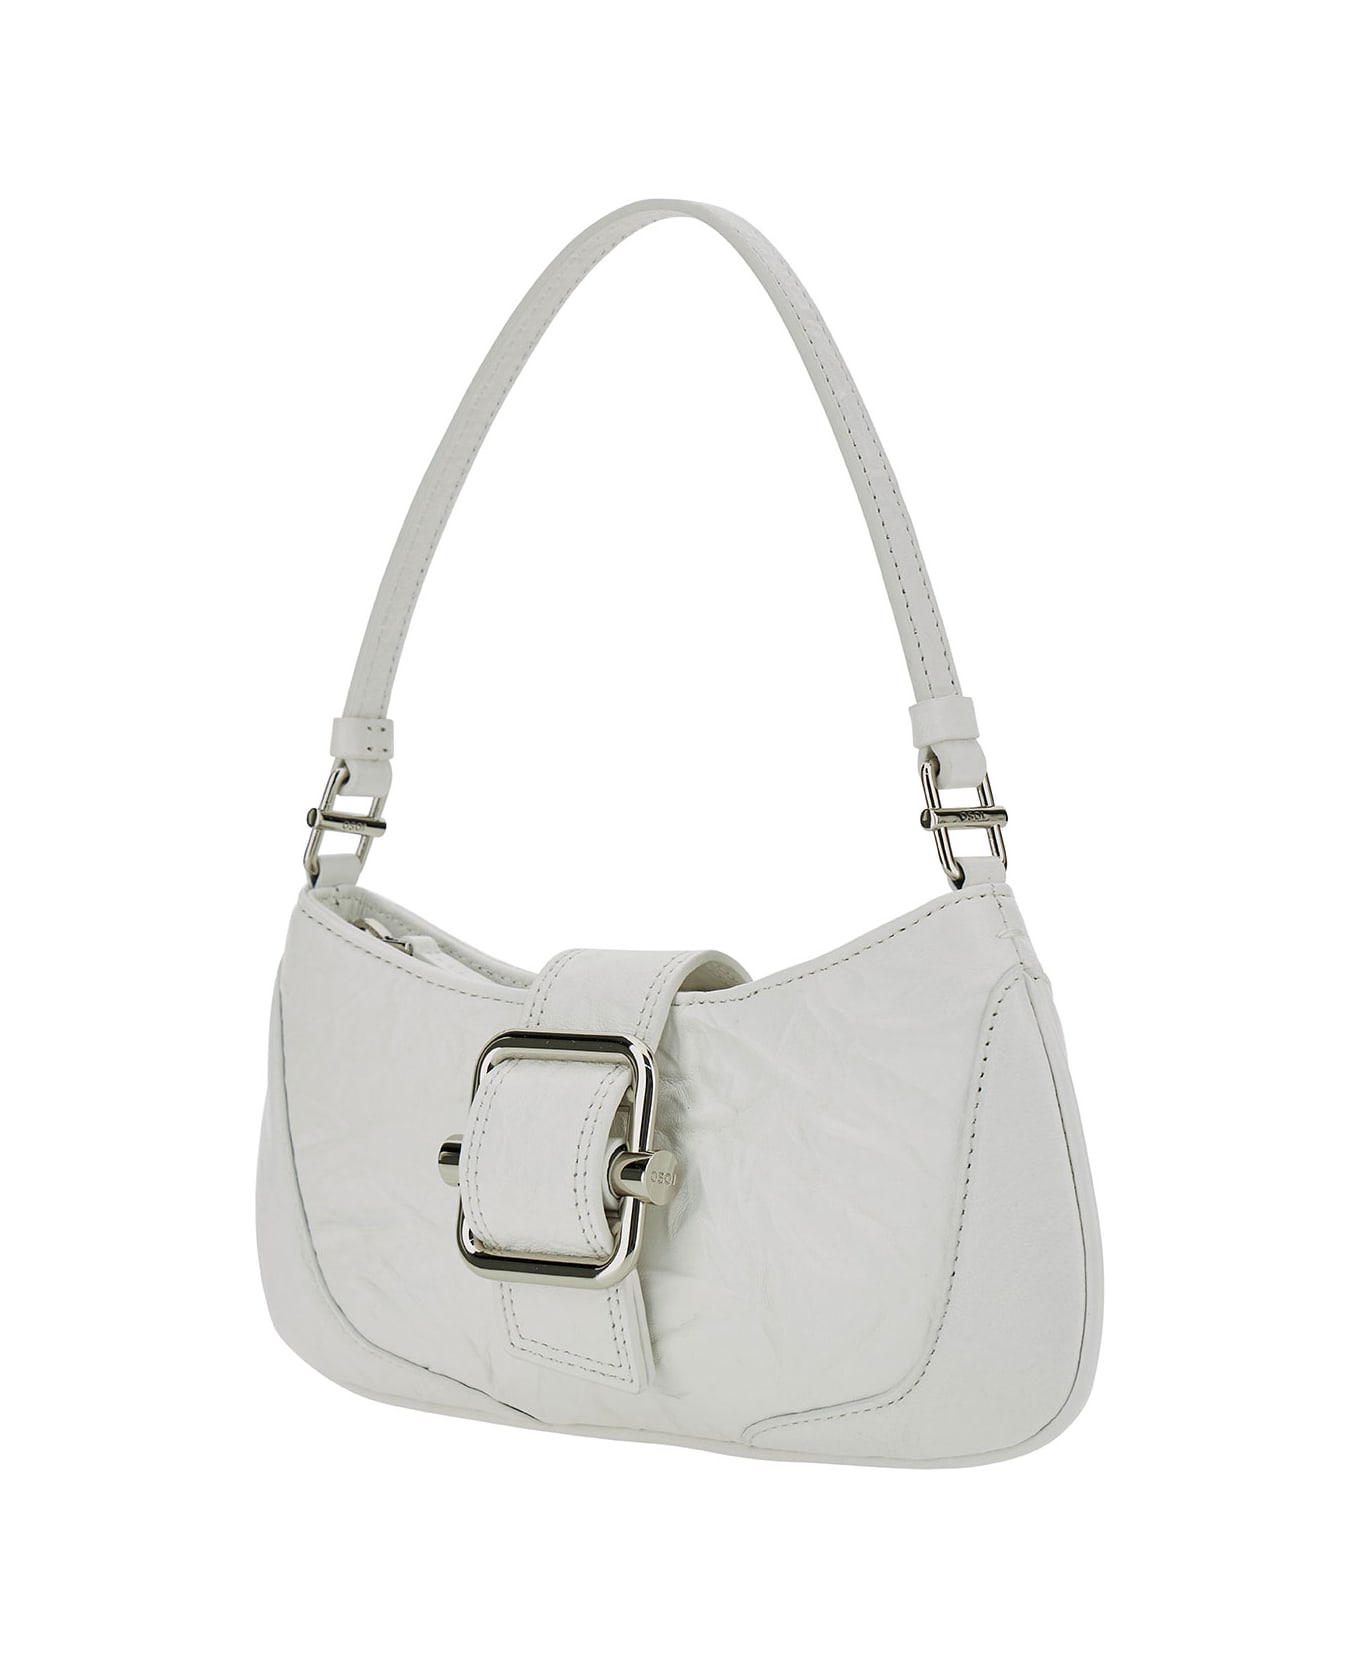 OSOI 'small Brocle' White Shoulder Bag In Hammered Leather Woman - White